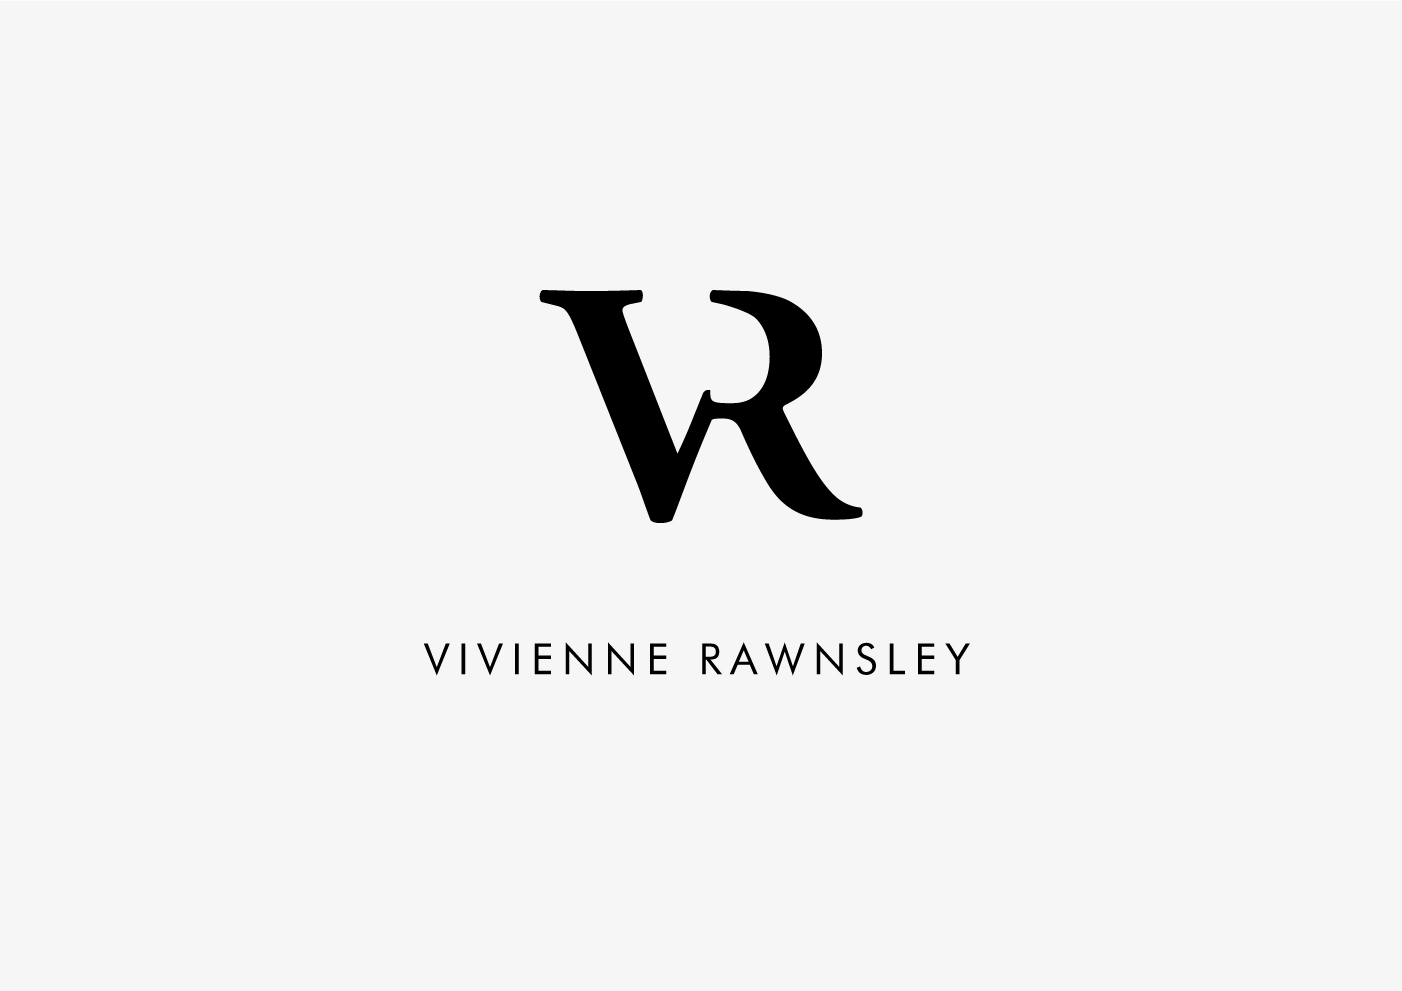 Business rebrand for hypnotherapist Vivienne Rawnsley by Hive of Many